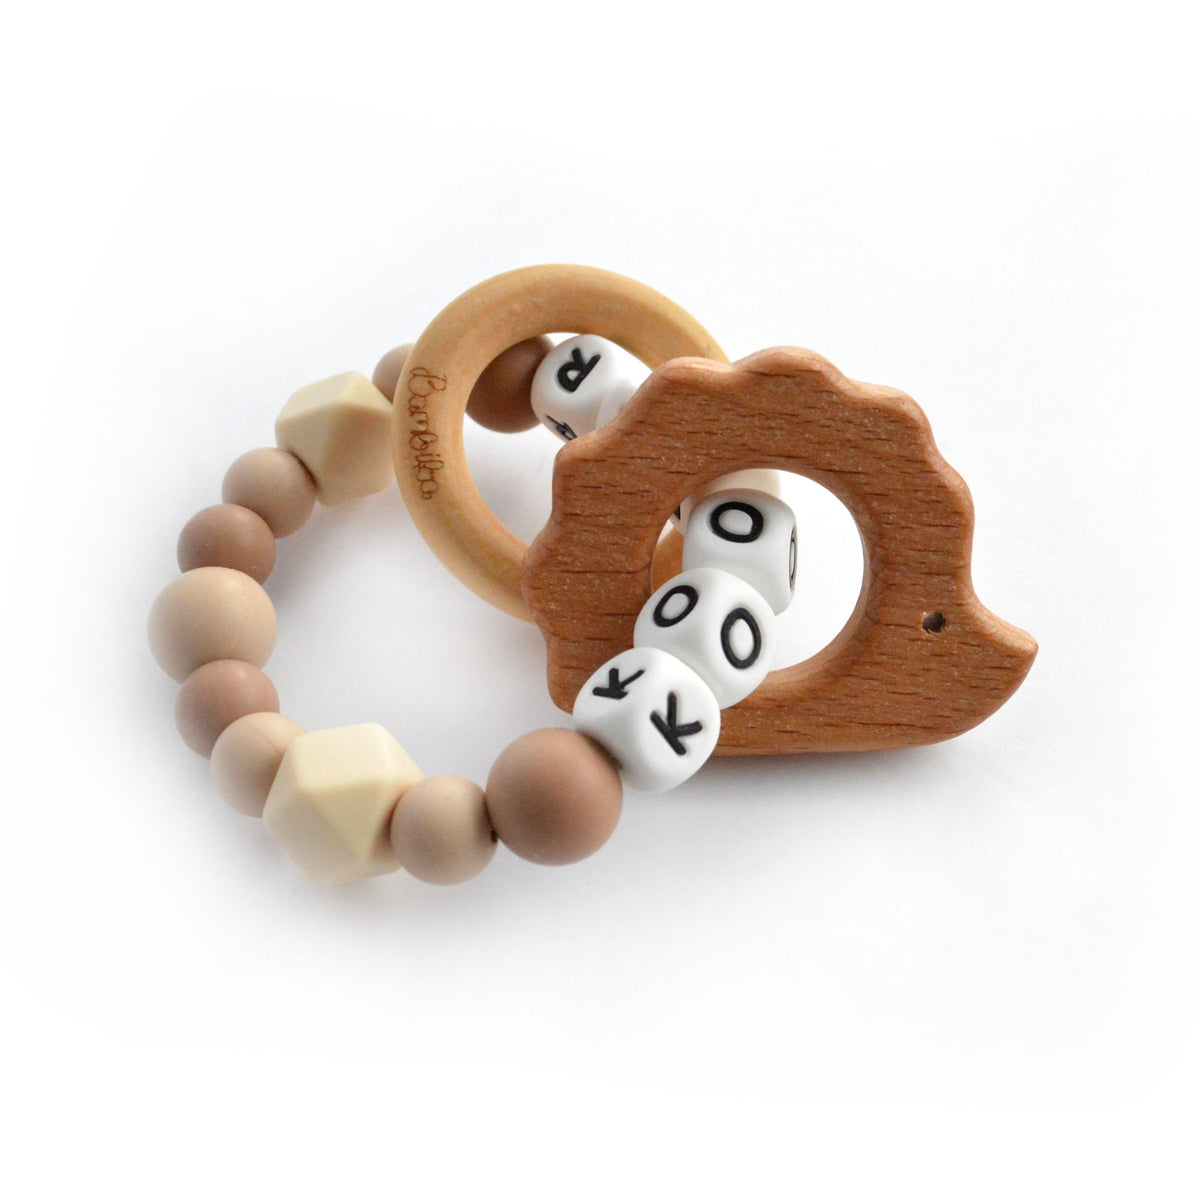 Mushie Light Brown Dog Silicone Baby Teether + Reviews